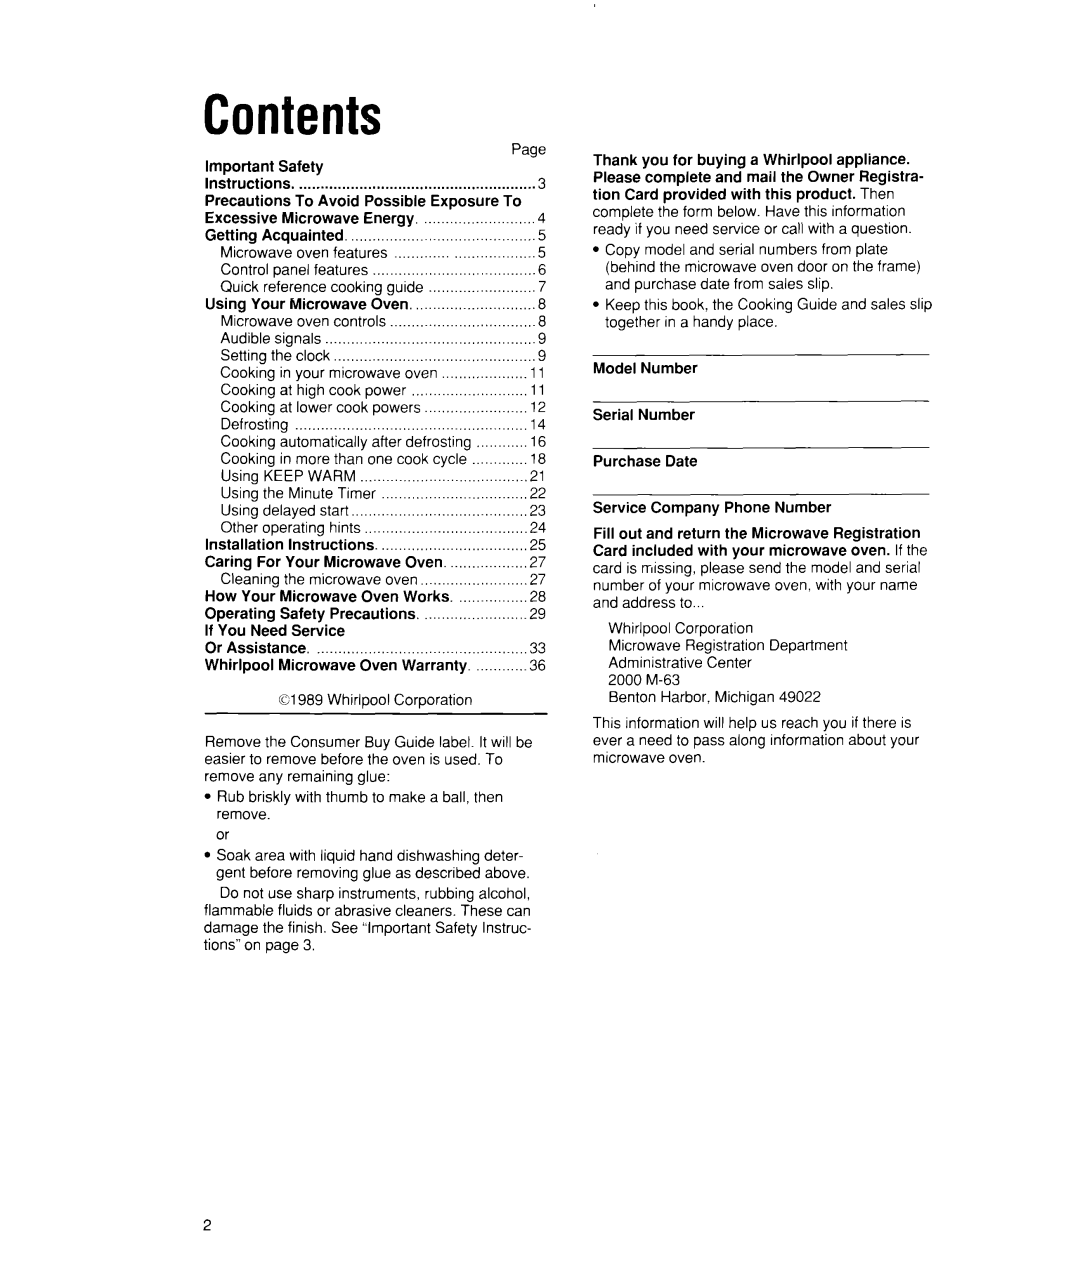 Whirlpool MW7400XW manual Contents 